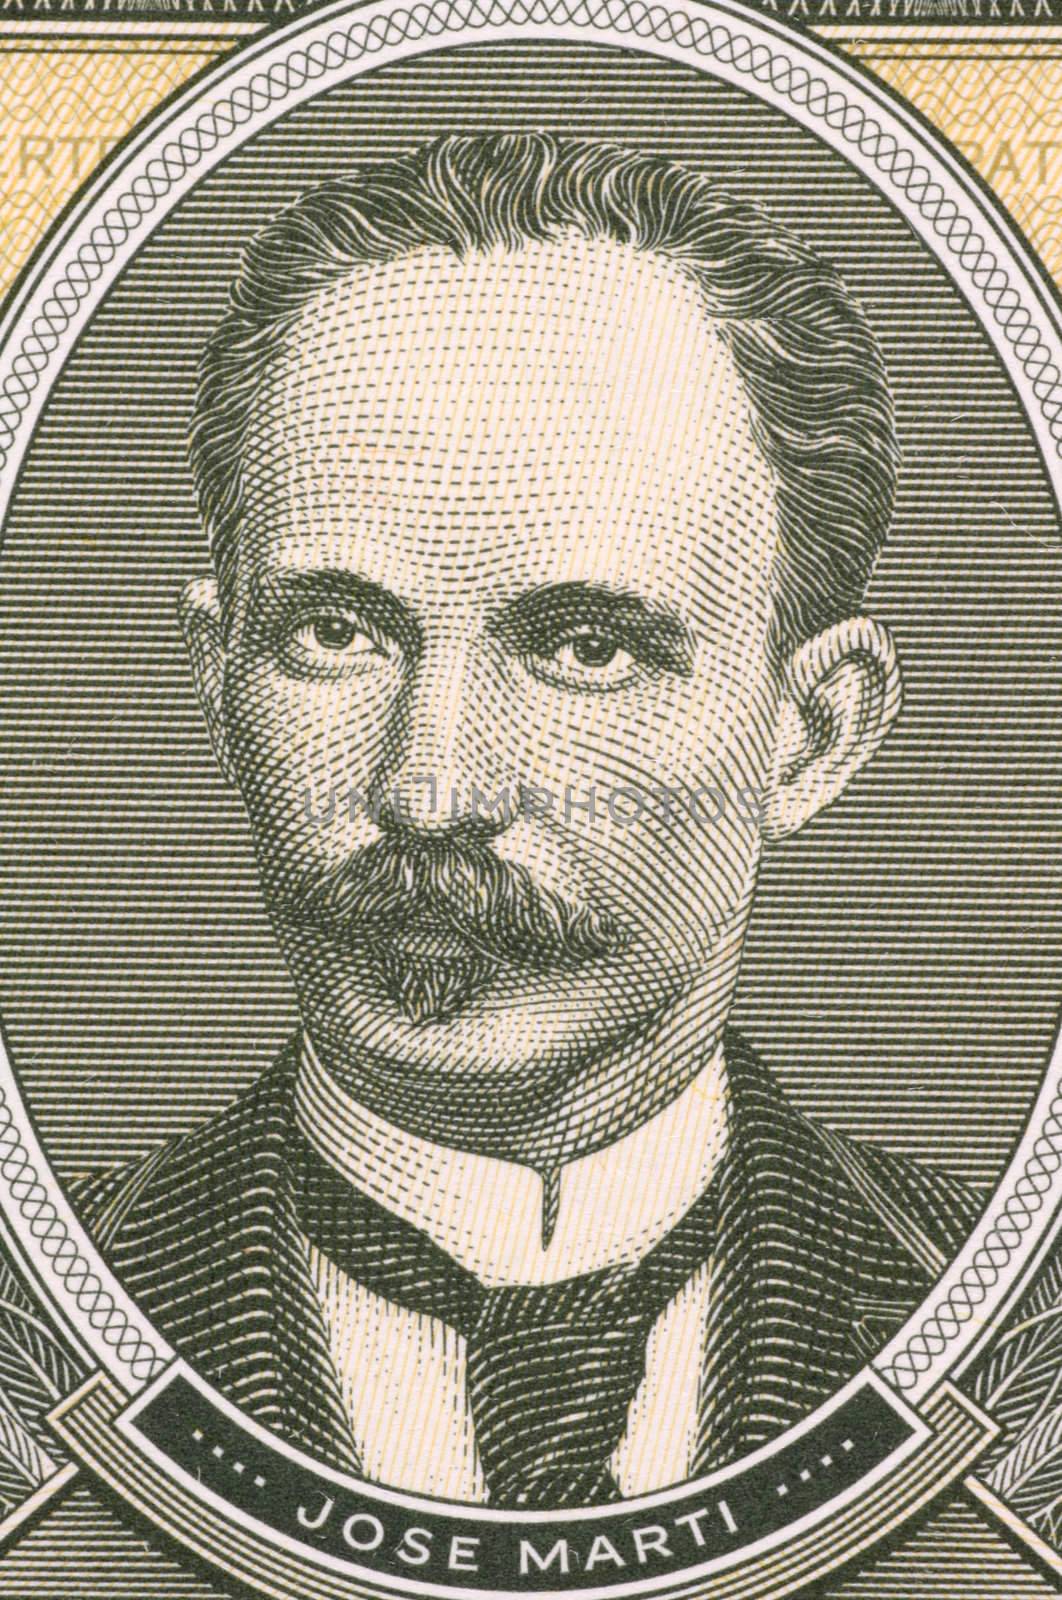 Jose Marti on 1 Peso 1986 from Cuba. Cuban national hero who fought against spanish and later usa. He was also an important figure in latin American literature.